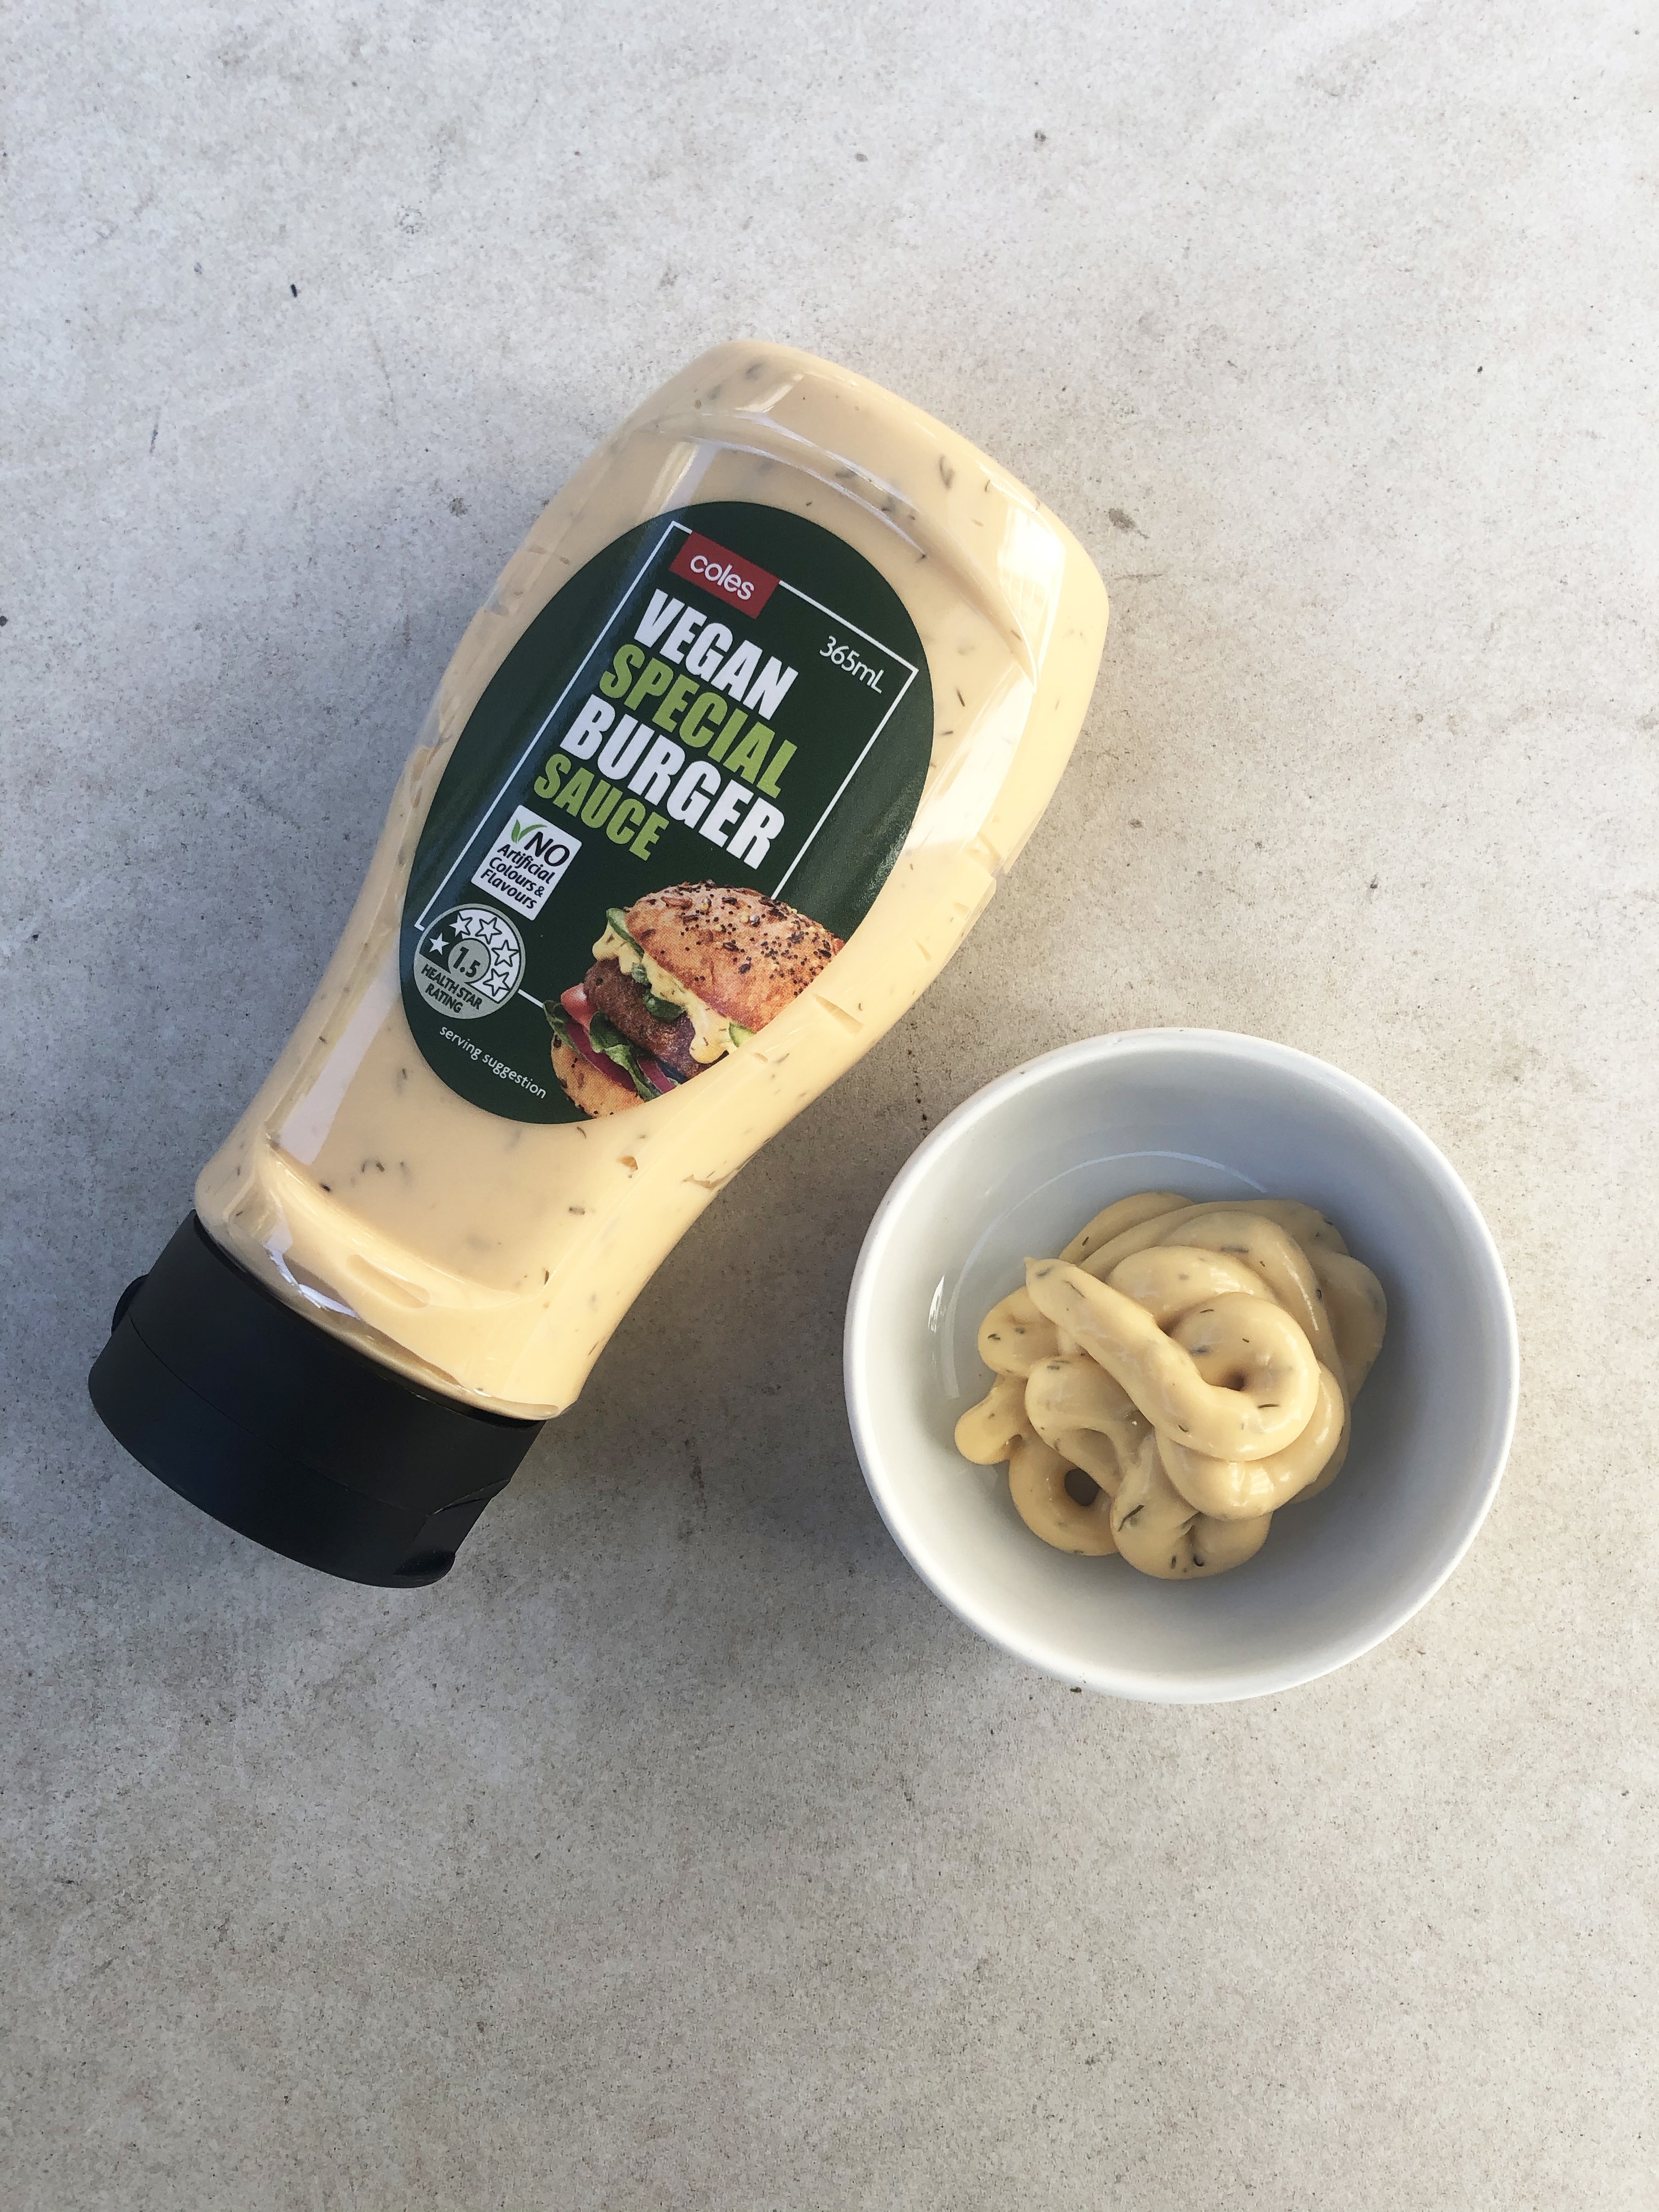 The Coles Vegan Special Burger Sauce bottle alongside a small bowl filled with some of the sauce